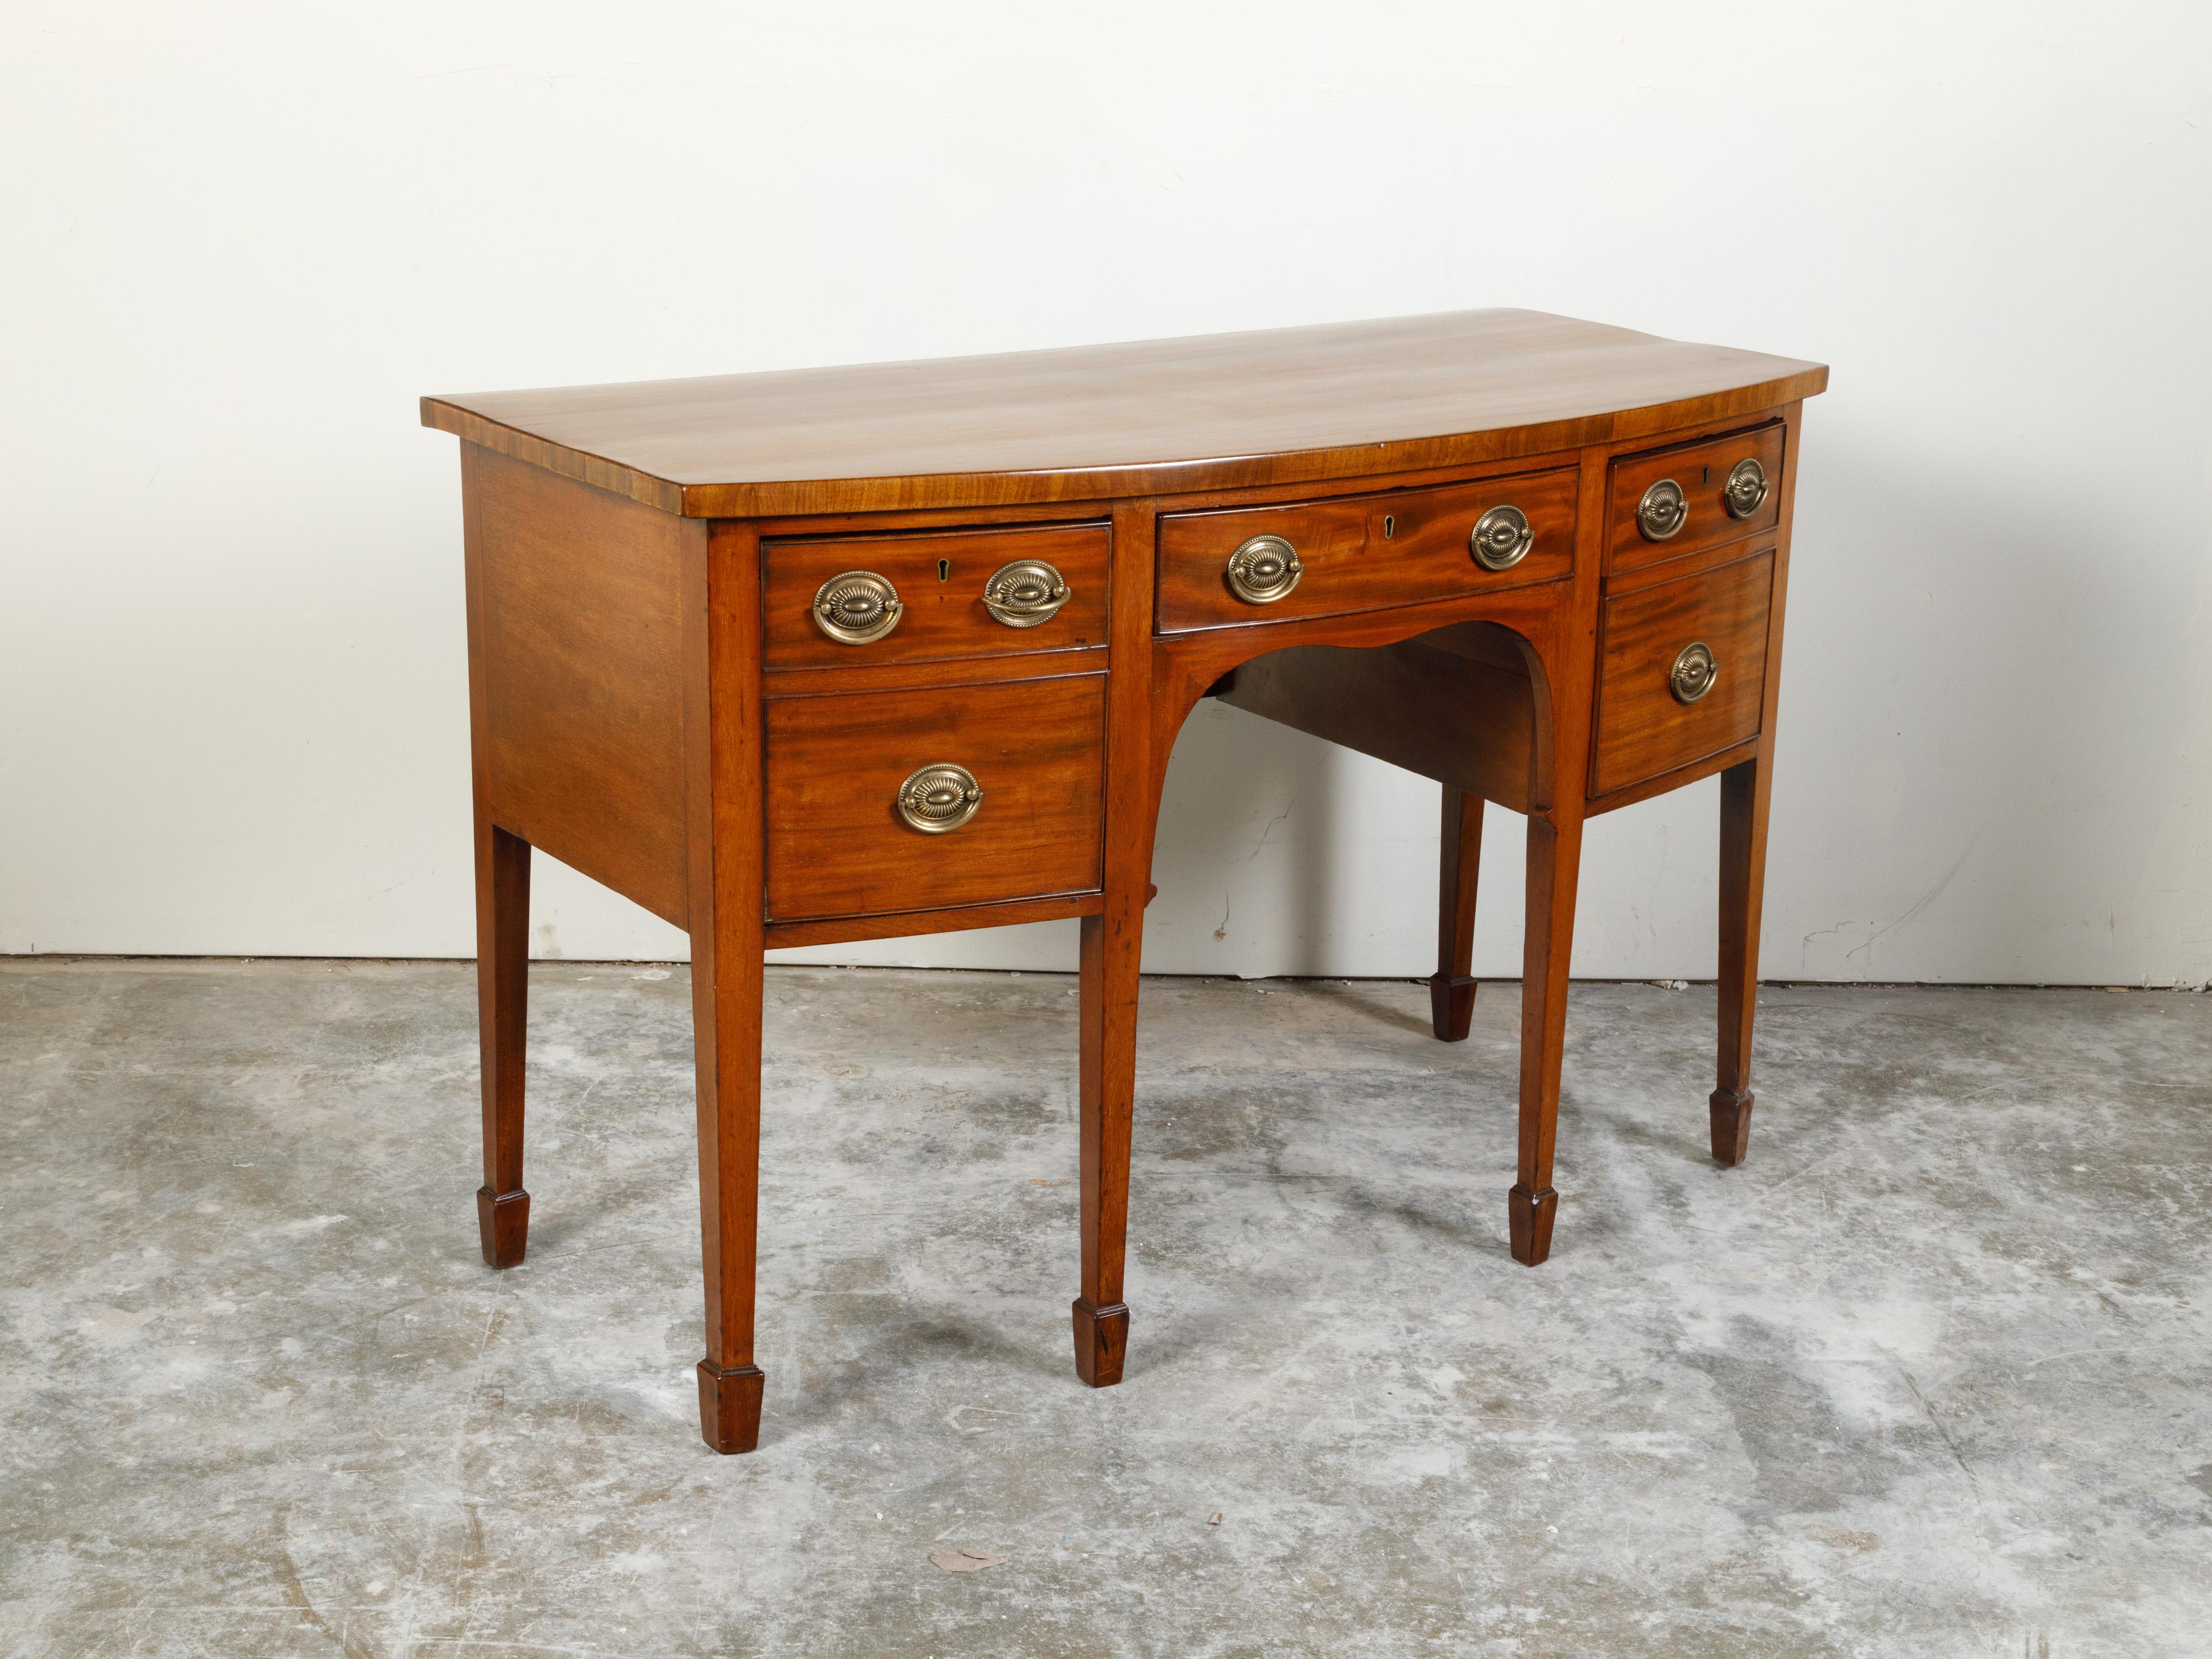 19th Century English Georgian Period 1820s Mahogany Five-Drawer Sideboard with Tapered Legs For Sale